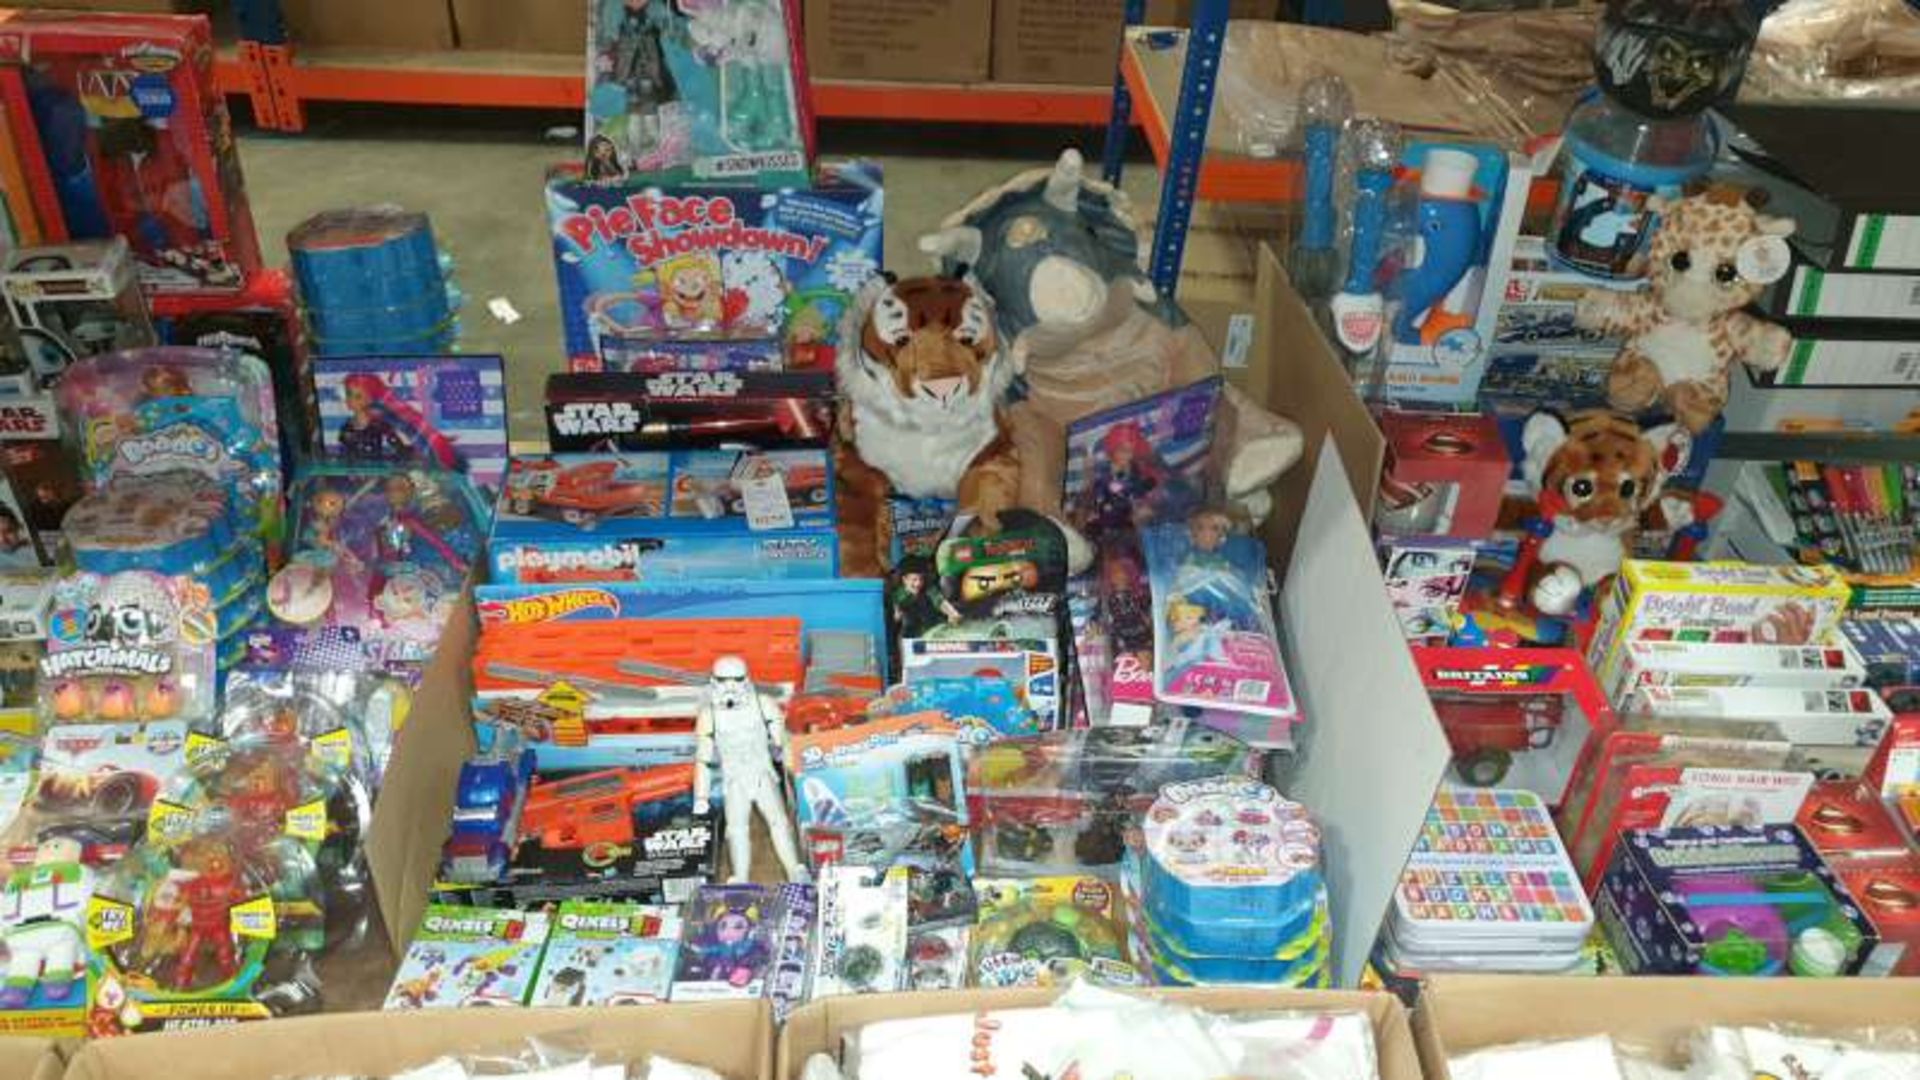 MIXED TOY LOT CONTAINING PLAYMOBIL HOT WHEELS, DISNEY PRINCESS, PIE FACE SHOWDOWN, STAR WARS, MARVEL